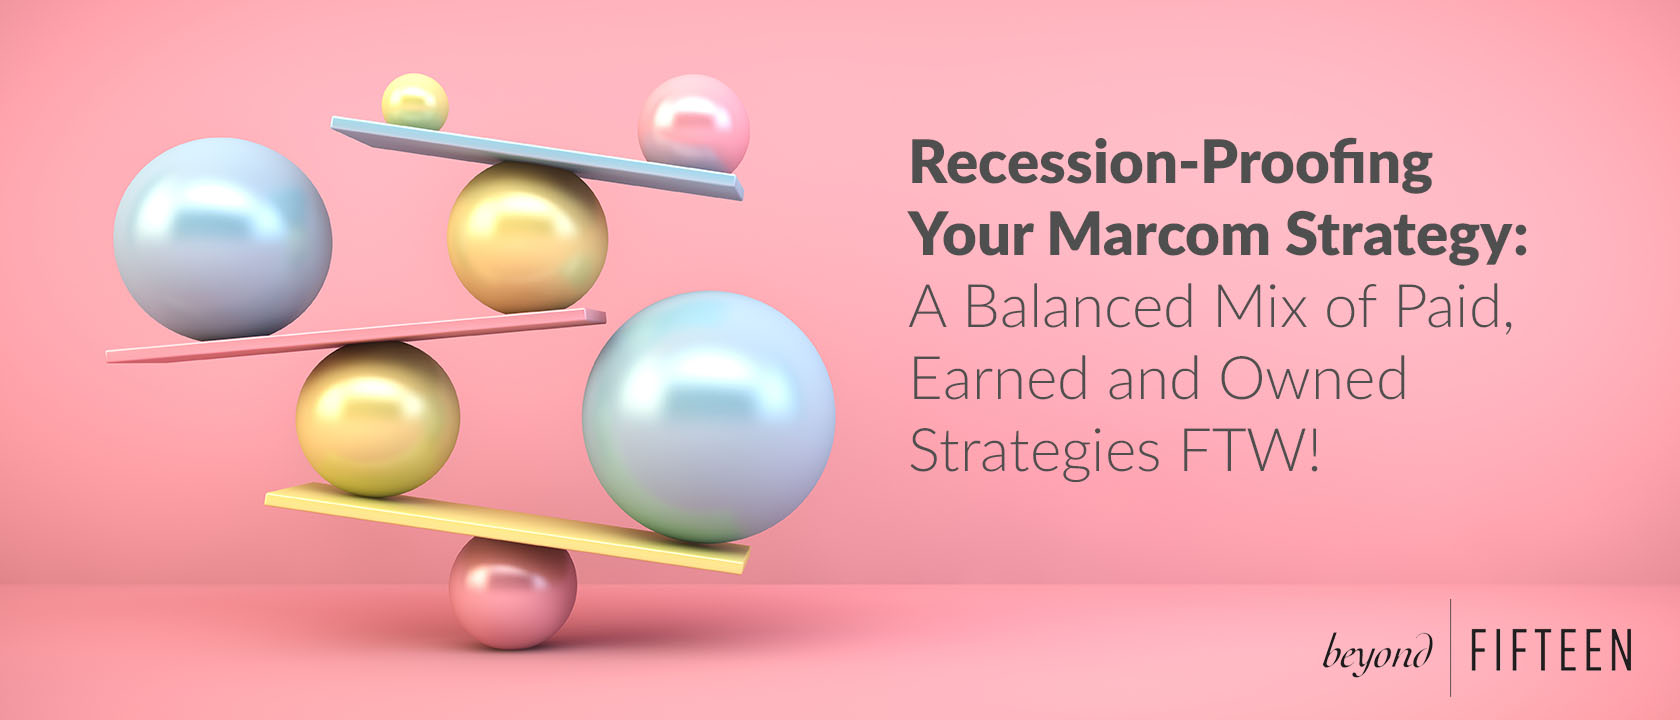 Recession-Proofing Your Marcom Strategy